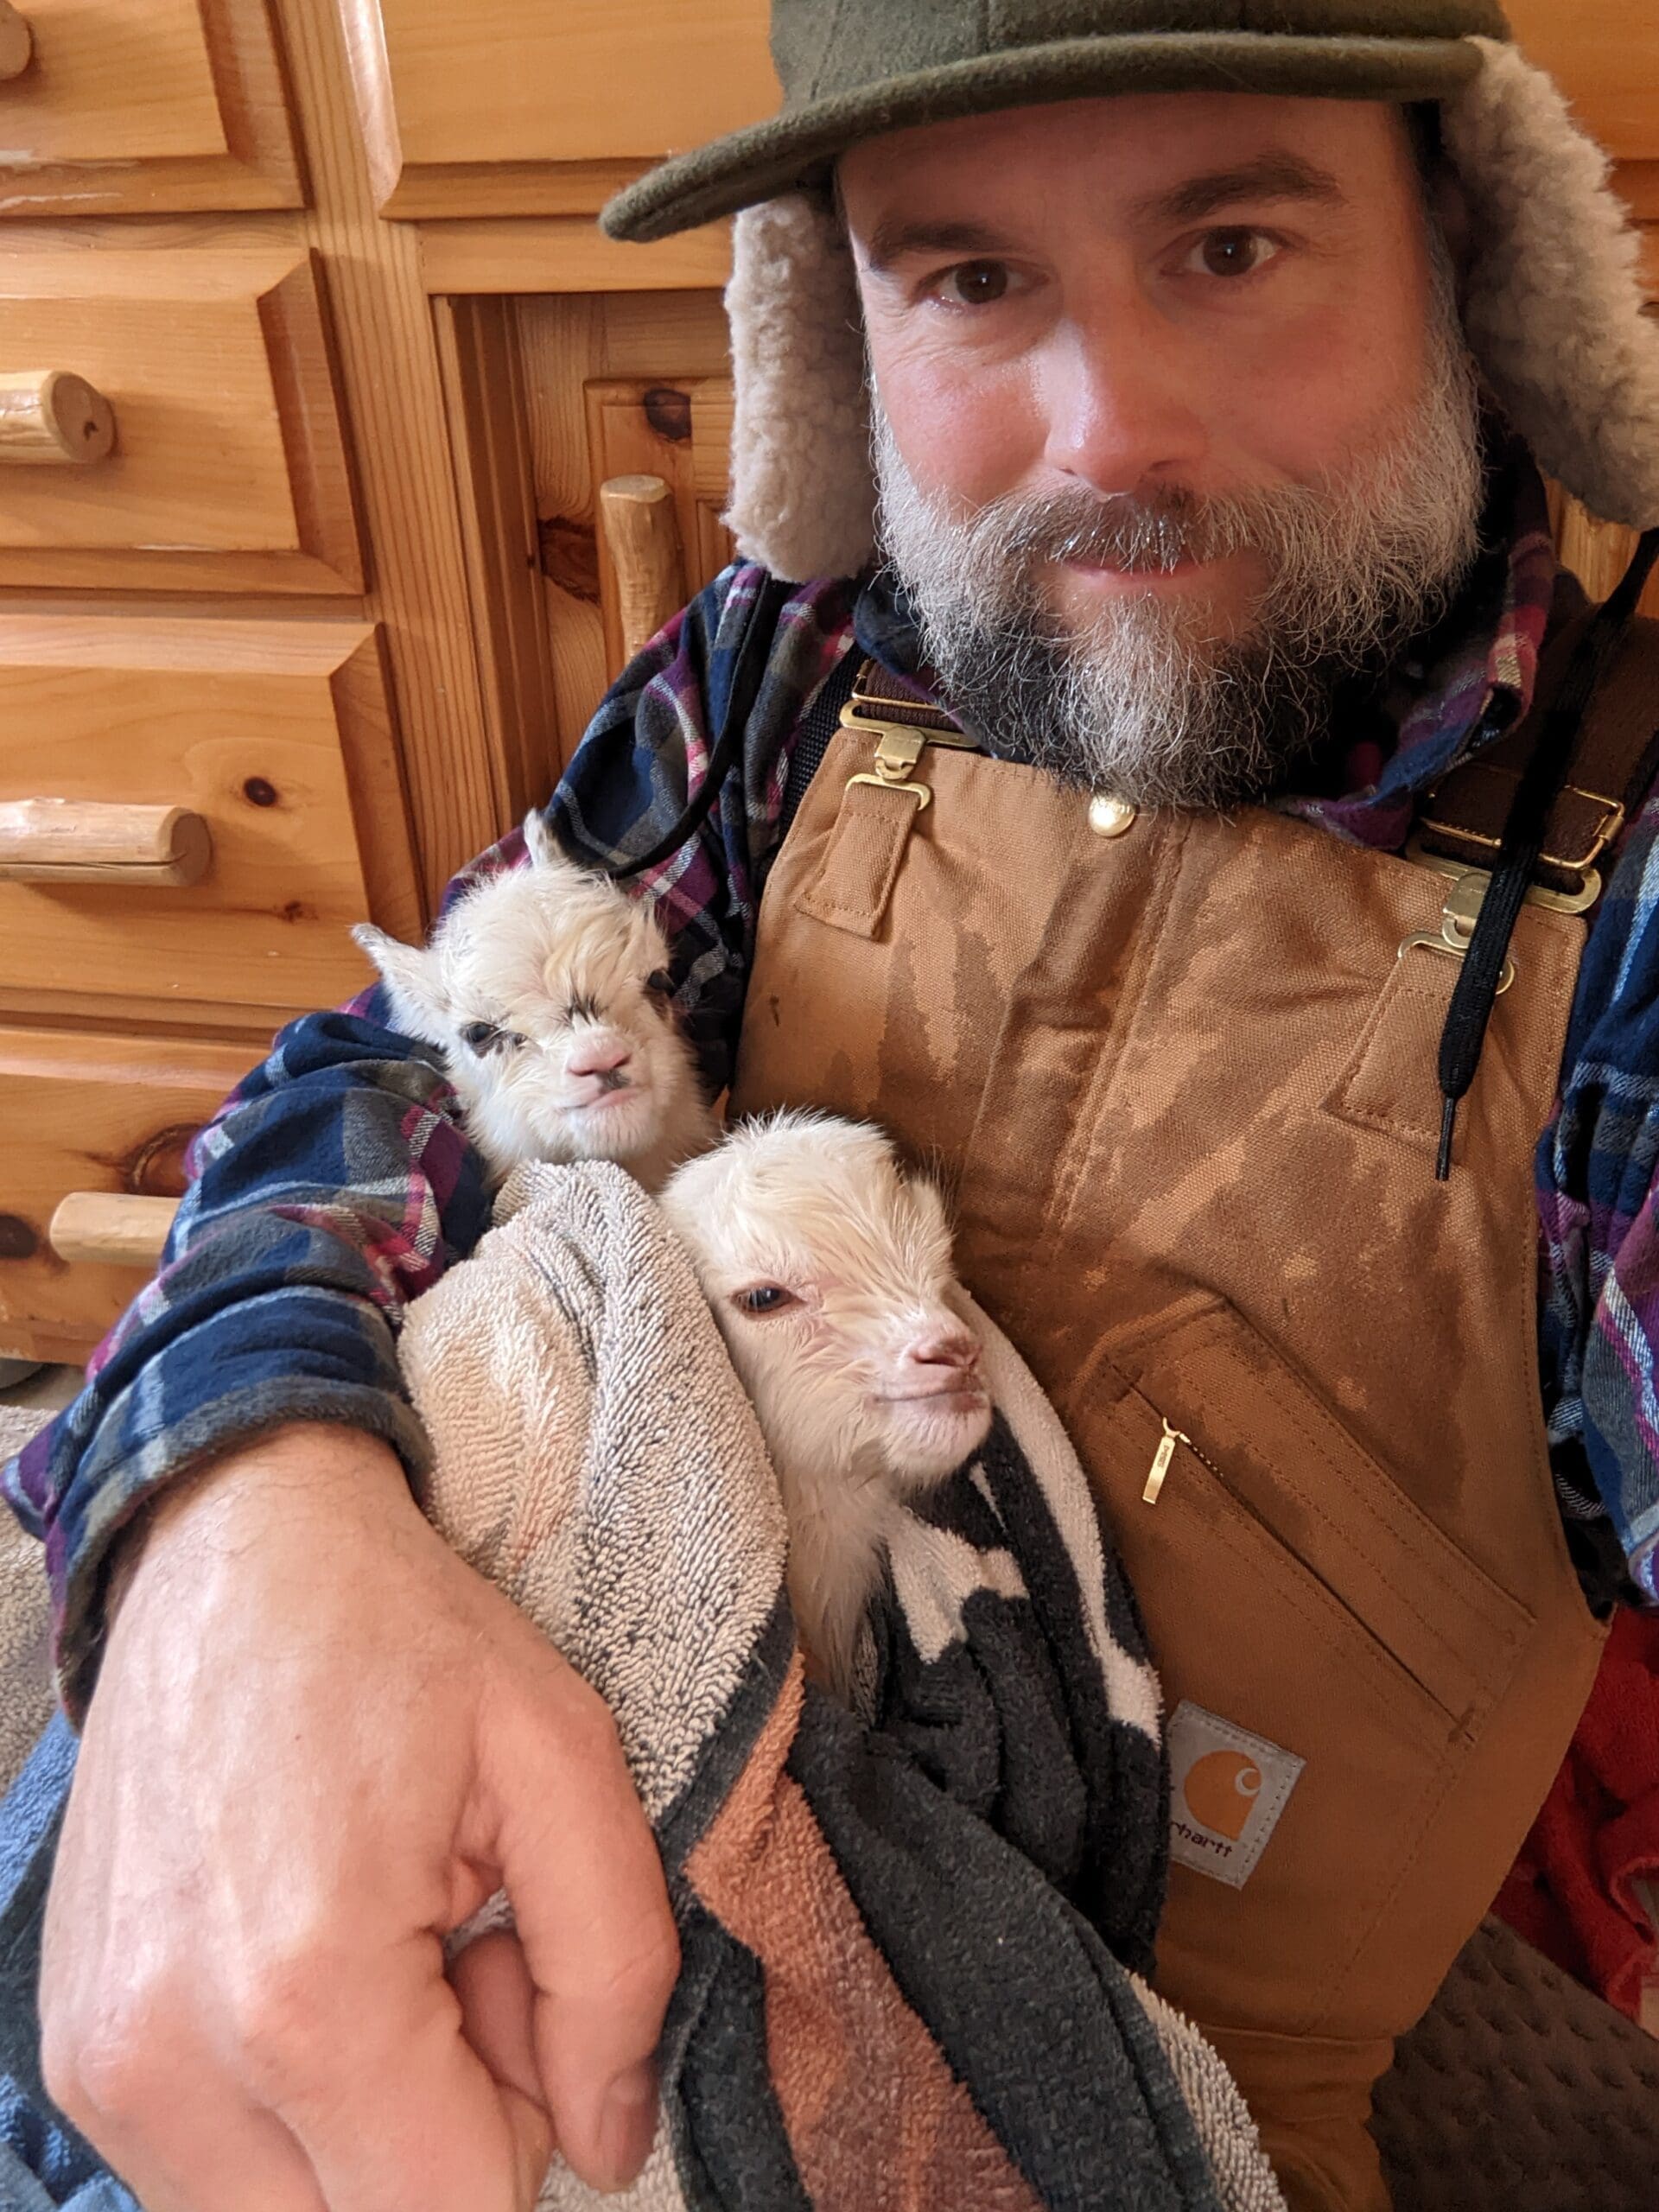 Man in winter clothes and hat holding two new born goats wrapped in a towel